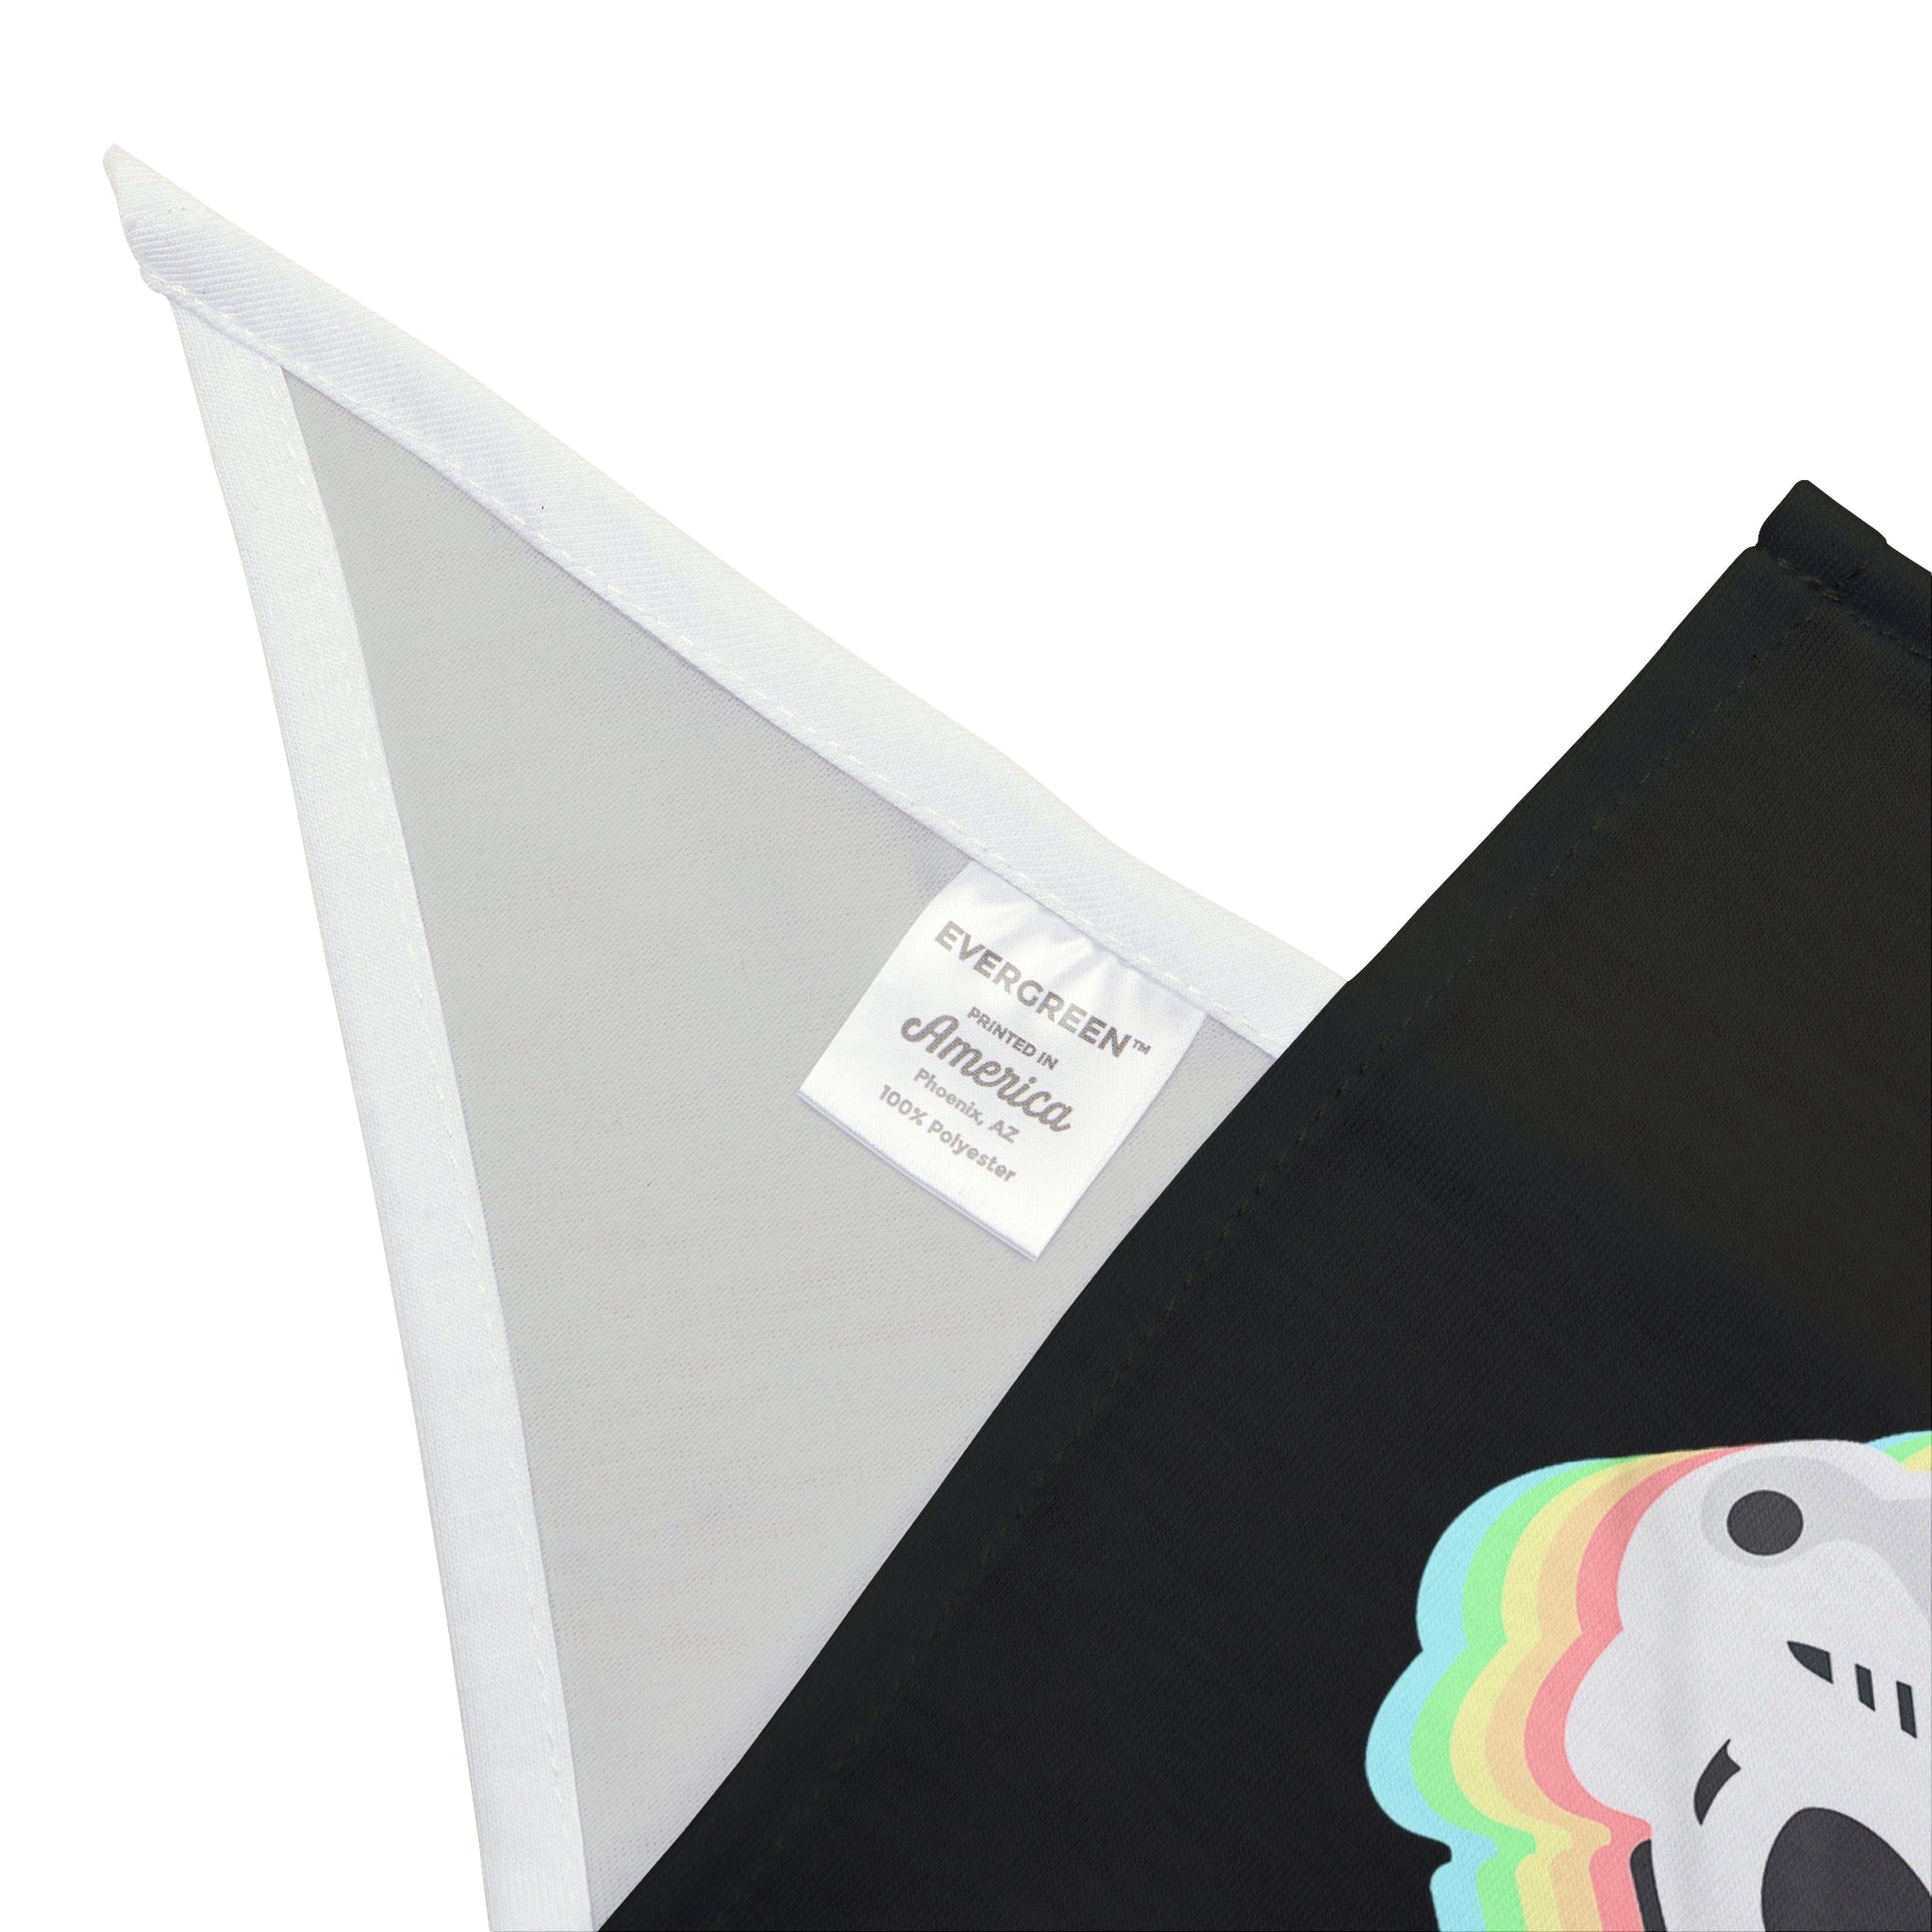 Close-up of a folded fabric with a white label that reads "EVERGREEN America 100% Polyester." The Star Wars Easter Stormtrooper - Pet Bandana, perfect for crafting a pet bandana, features colorful lines and partial white graphics on a black background.